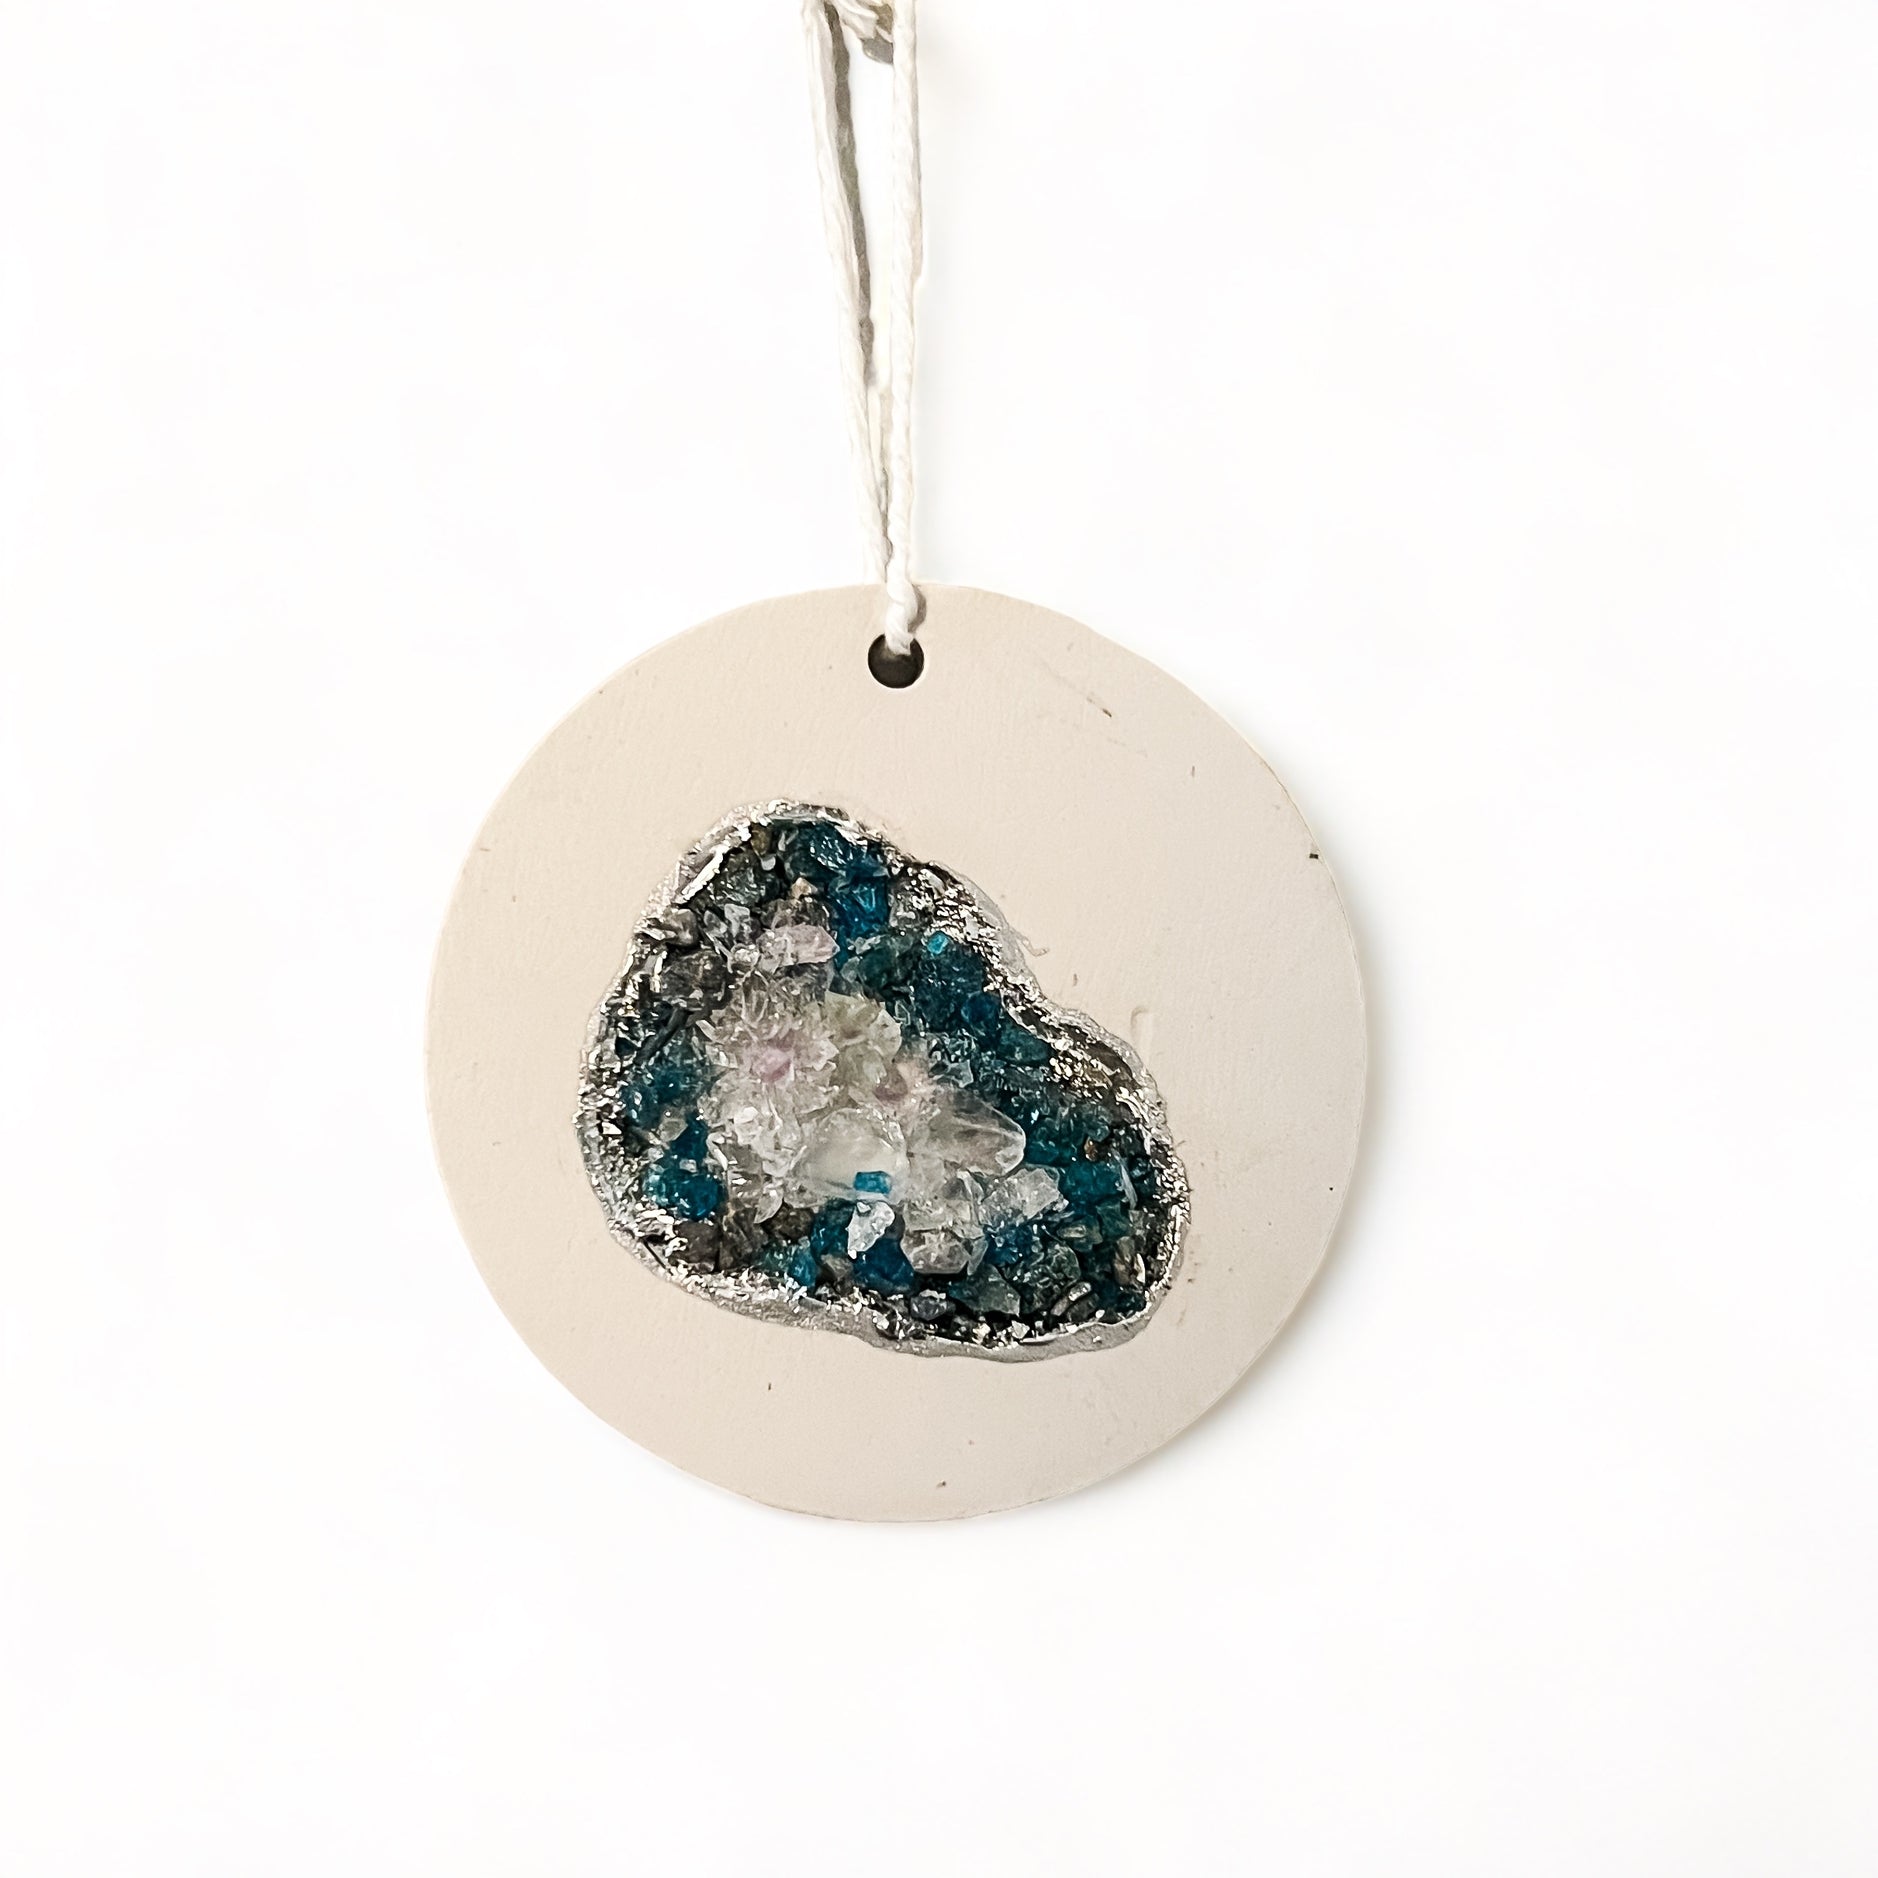 Stunning heirloom ornament whether it’s for your tree or decor for all year. Made from natural blue apatite, celestite, and smoky quartz crystals and outlined in silver chrome leaf.